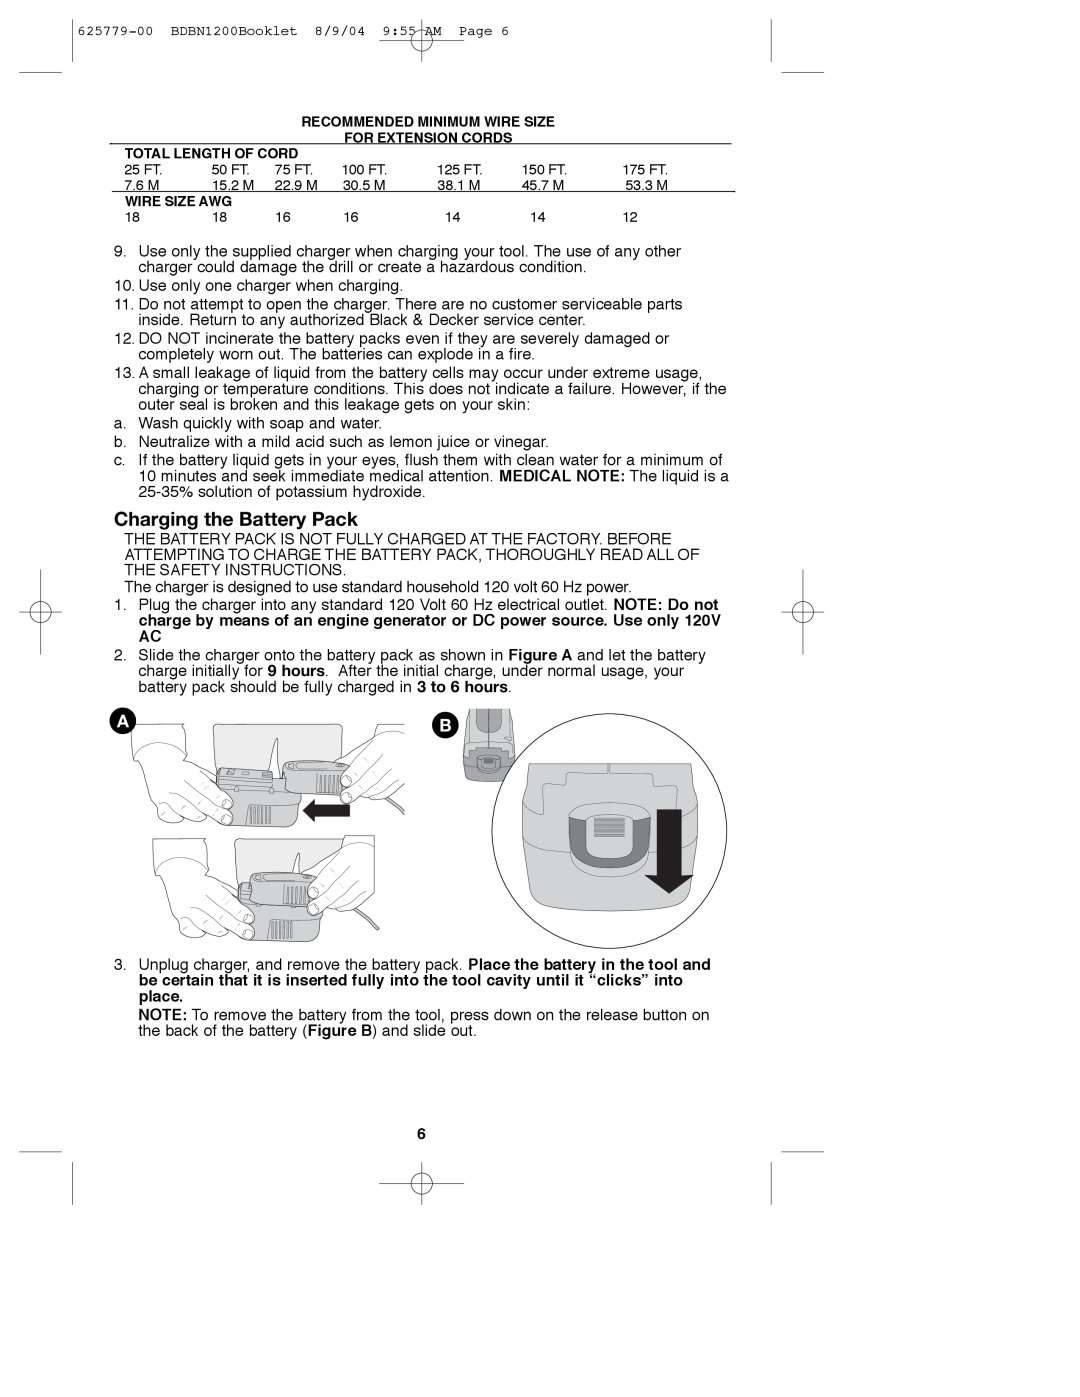 Black & Decker 625779-00, BDBN1200 instruction manual Charging the Battery Pack 